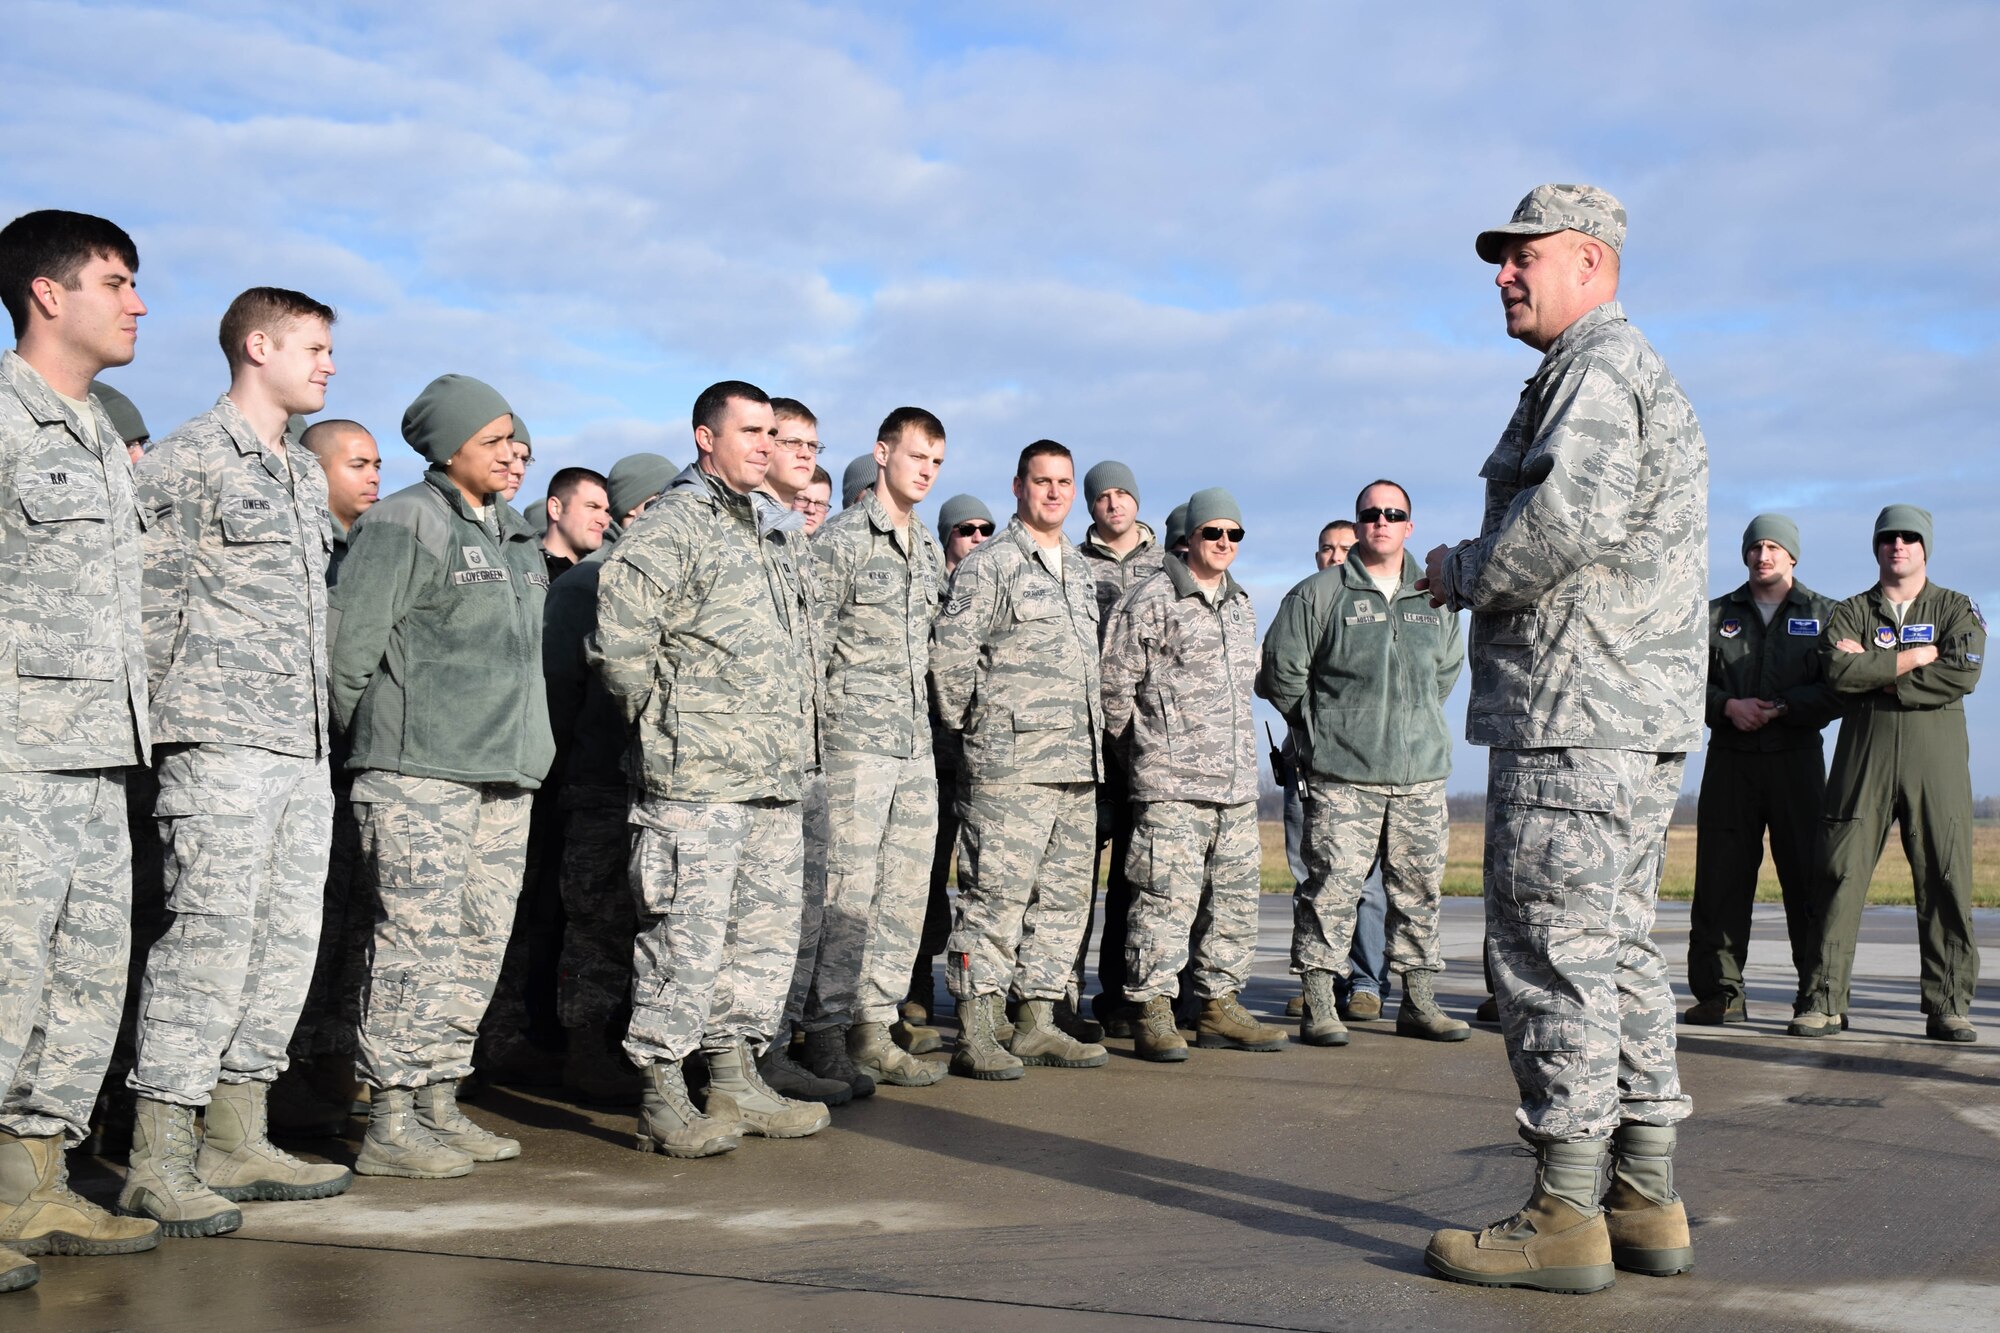 Maj. Gen. Vollmecke talks with Airmen from the 74th Expeditionary Fighter Squadron and answers their questions during a visit to Papa Air Base, Hungary, Dec. 2. The 74th EFS forward deployed to Hungary as part of Theater Security Package to conduct training and exercises alongside the Hungarian Air Force to increase readiness and enhance interoperability. (U.S. Air Force photo/ Capt. Lauren Ott)